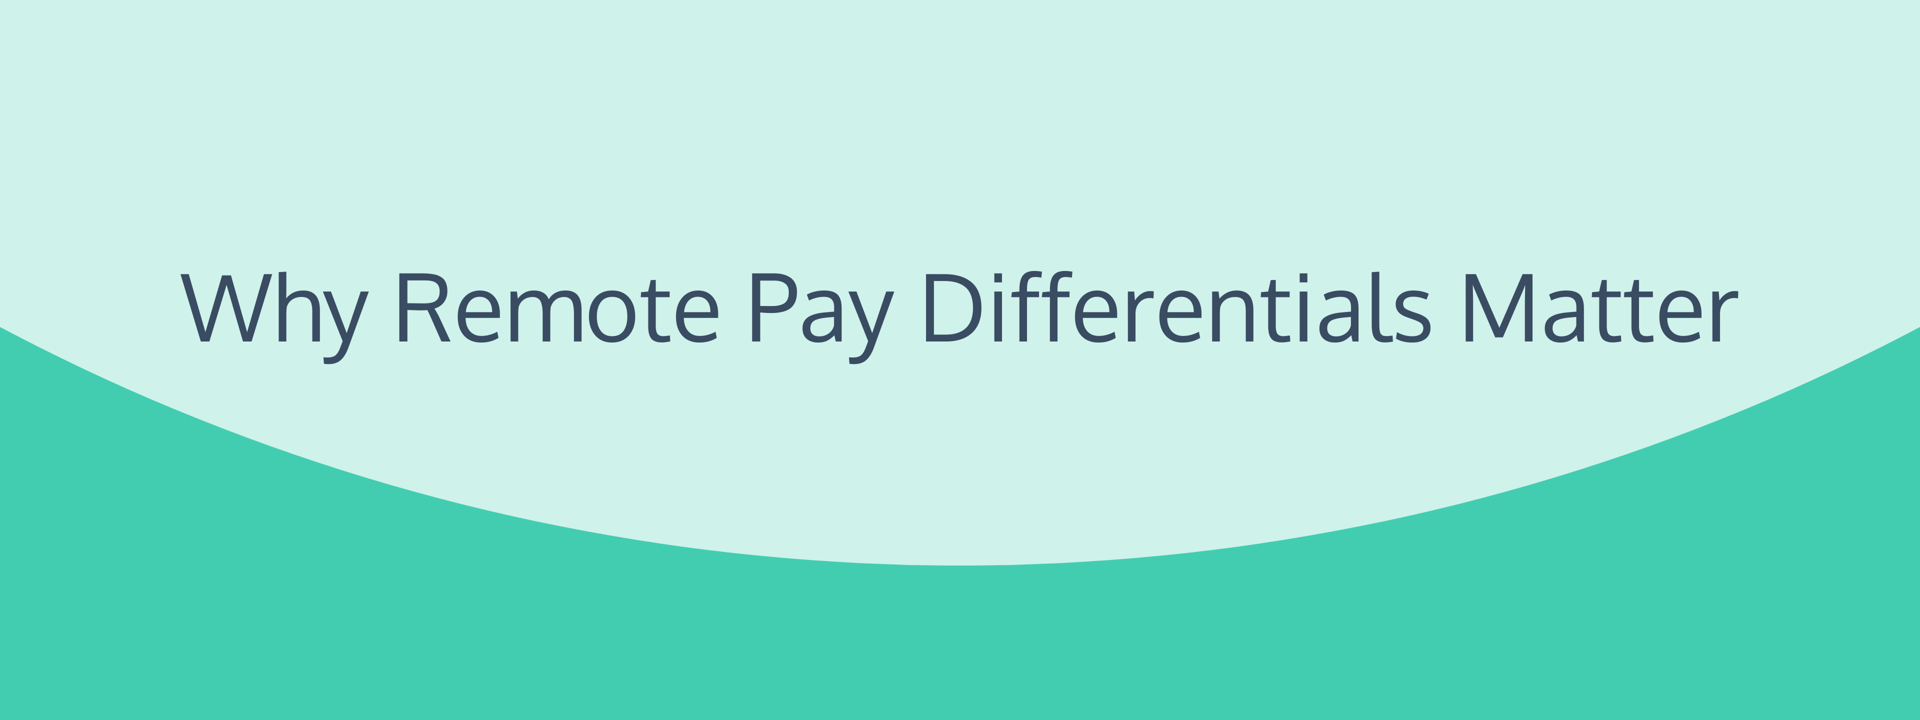 Why Remote Pay Differentials Matter